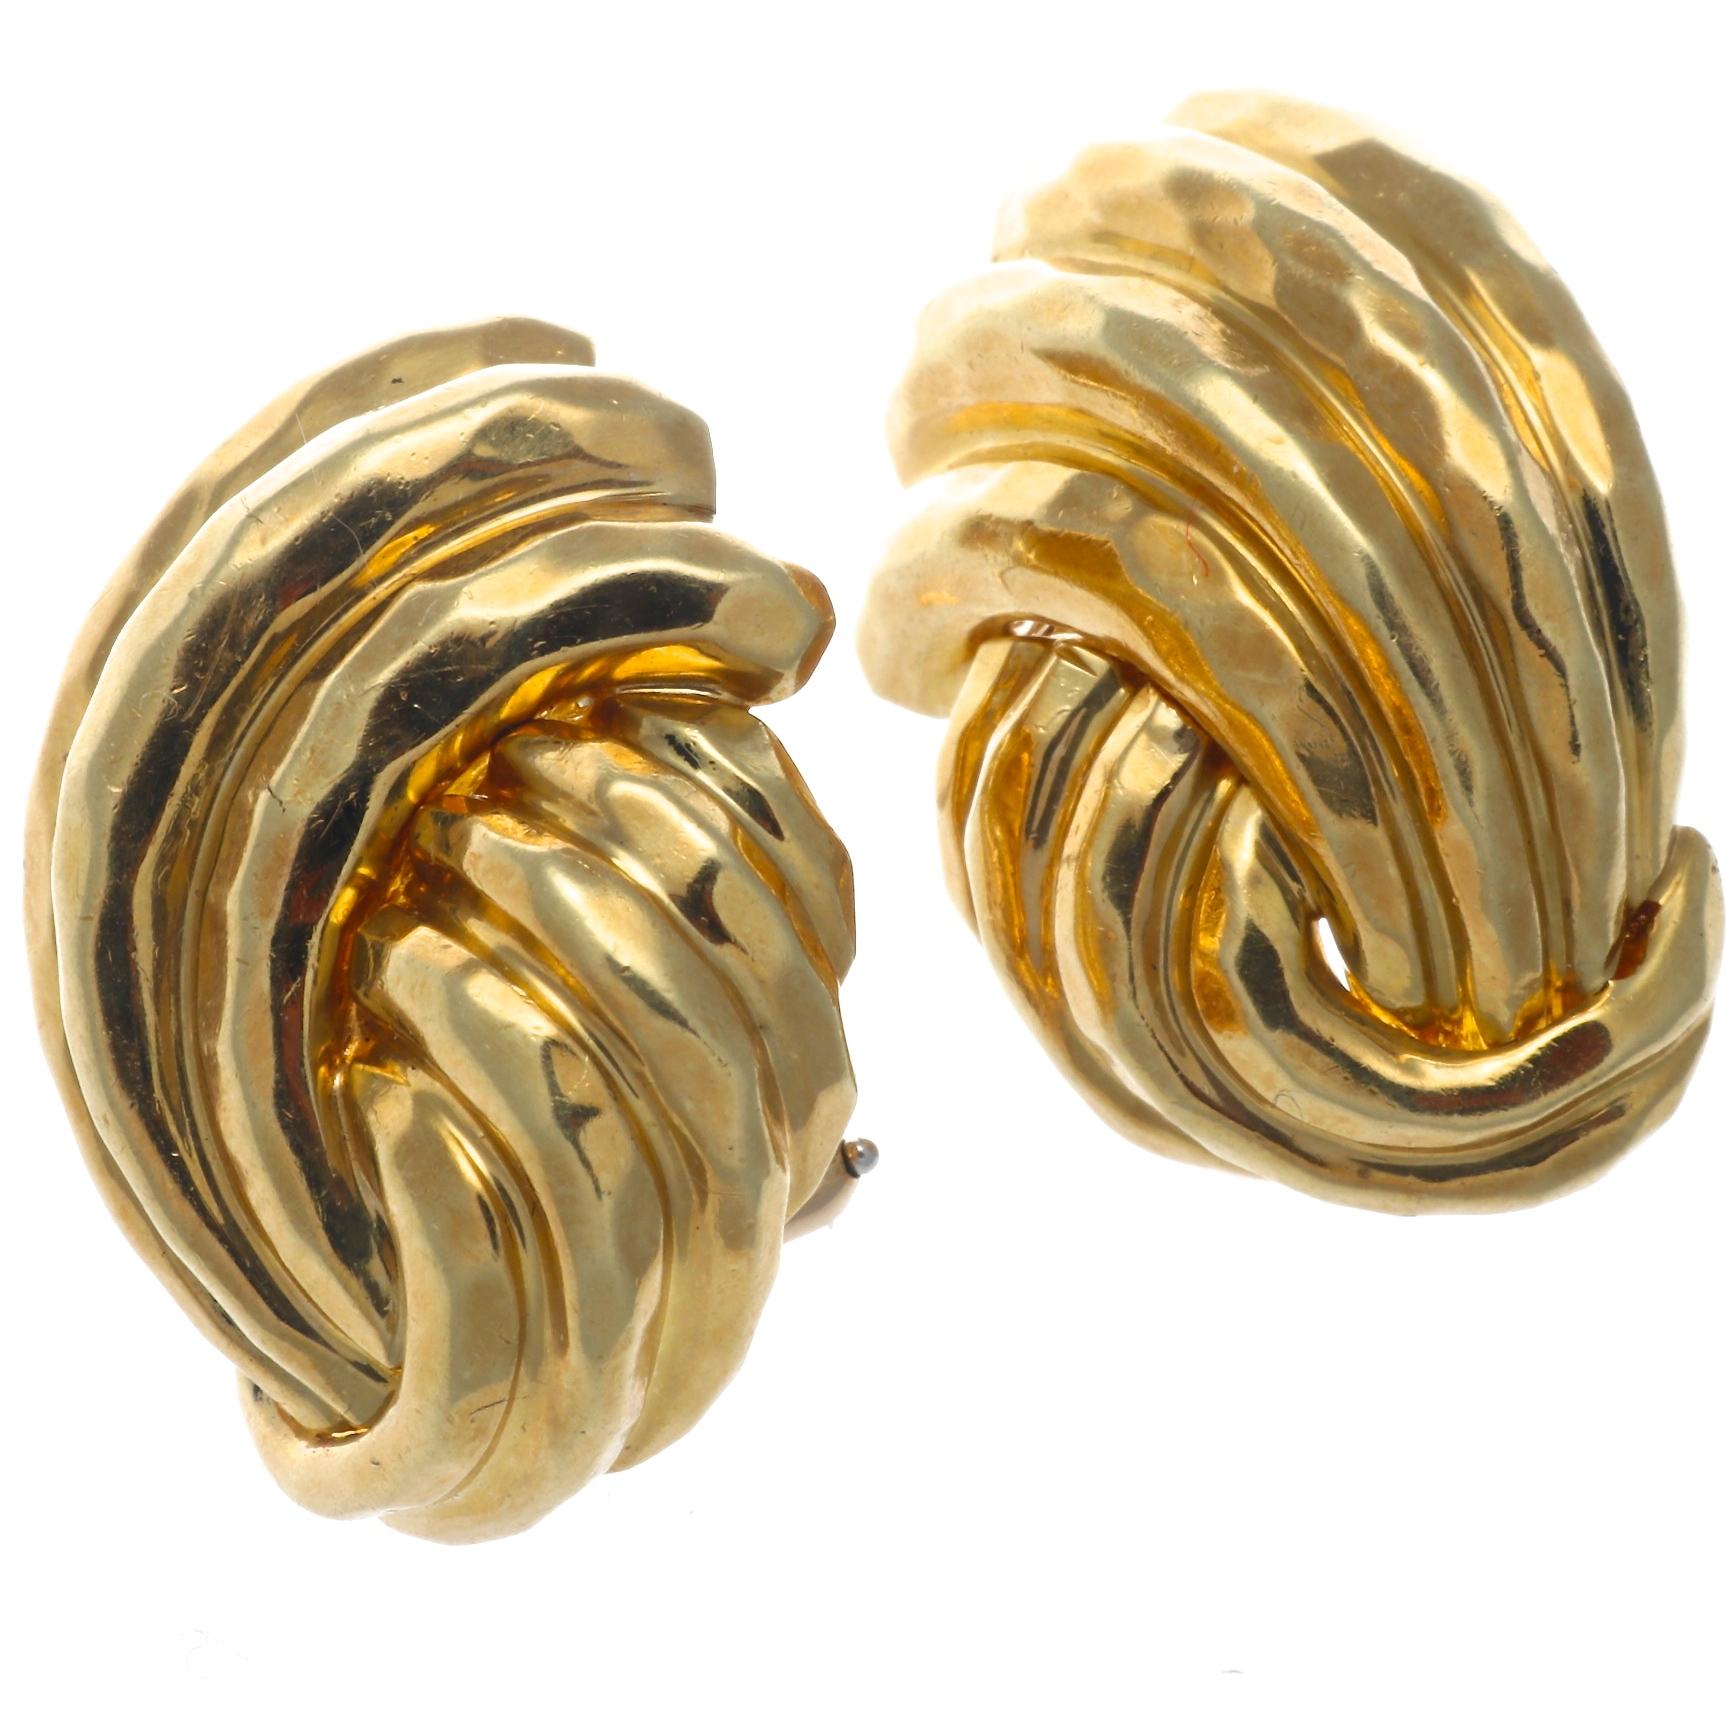 The texture on these circa 1980's Henry Dunay 18k gold hammered earrings gives them a richness and depth that make them irresistible. Total weight is 26.1 grams. Measurements are 1 inch x 3/4 inch
Signed Dunay and stamped 18k. 